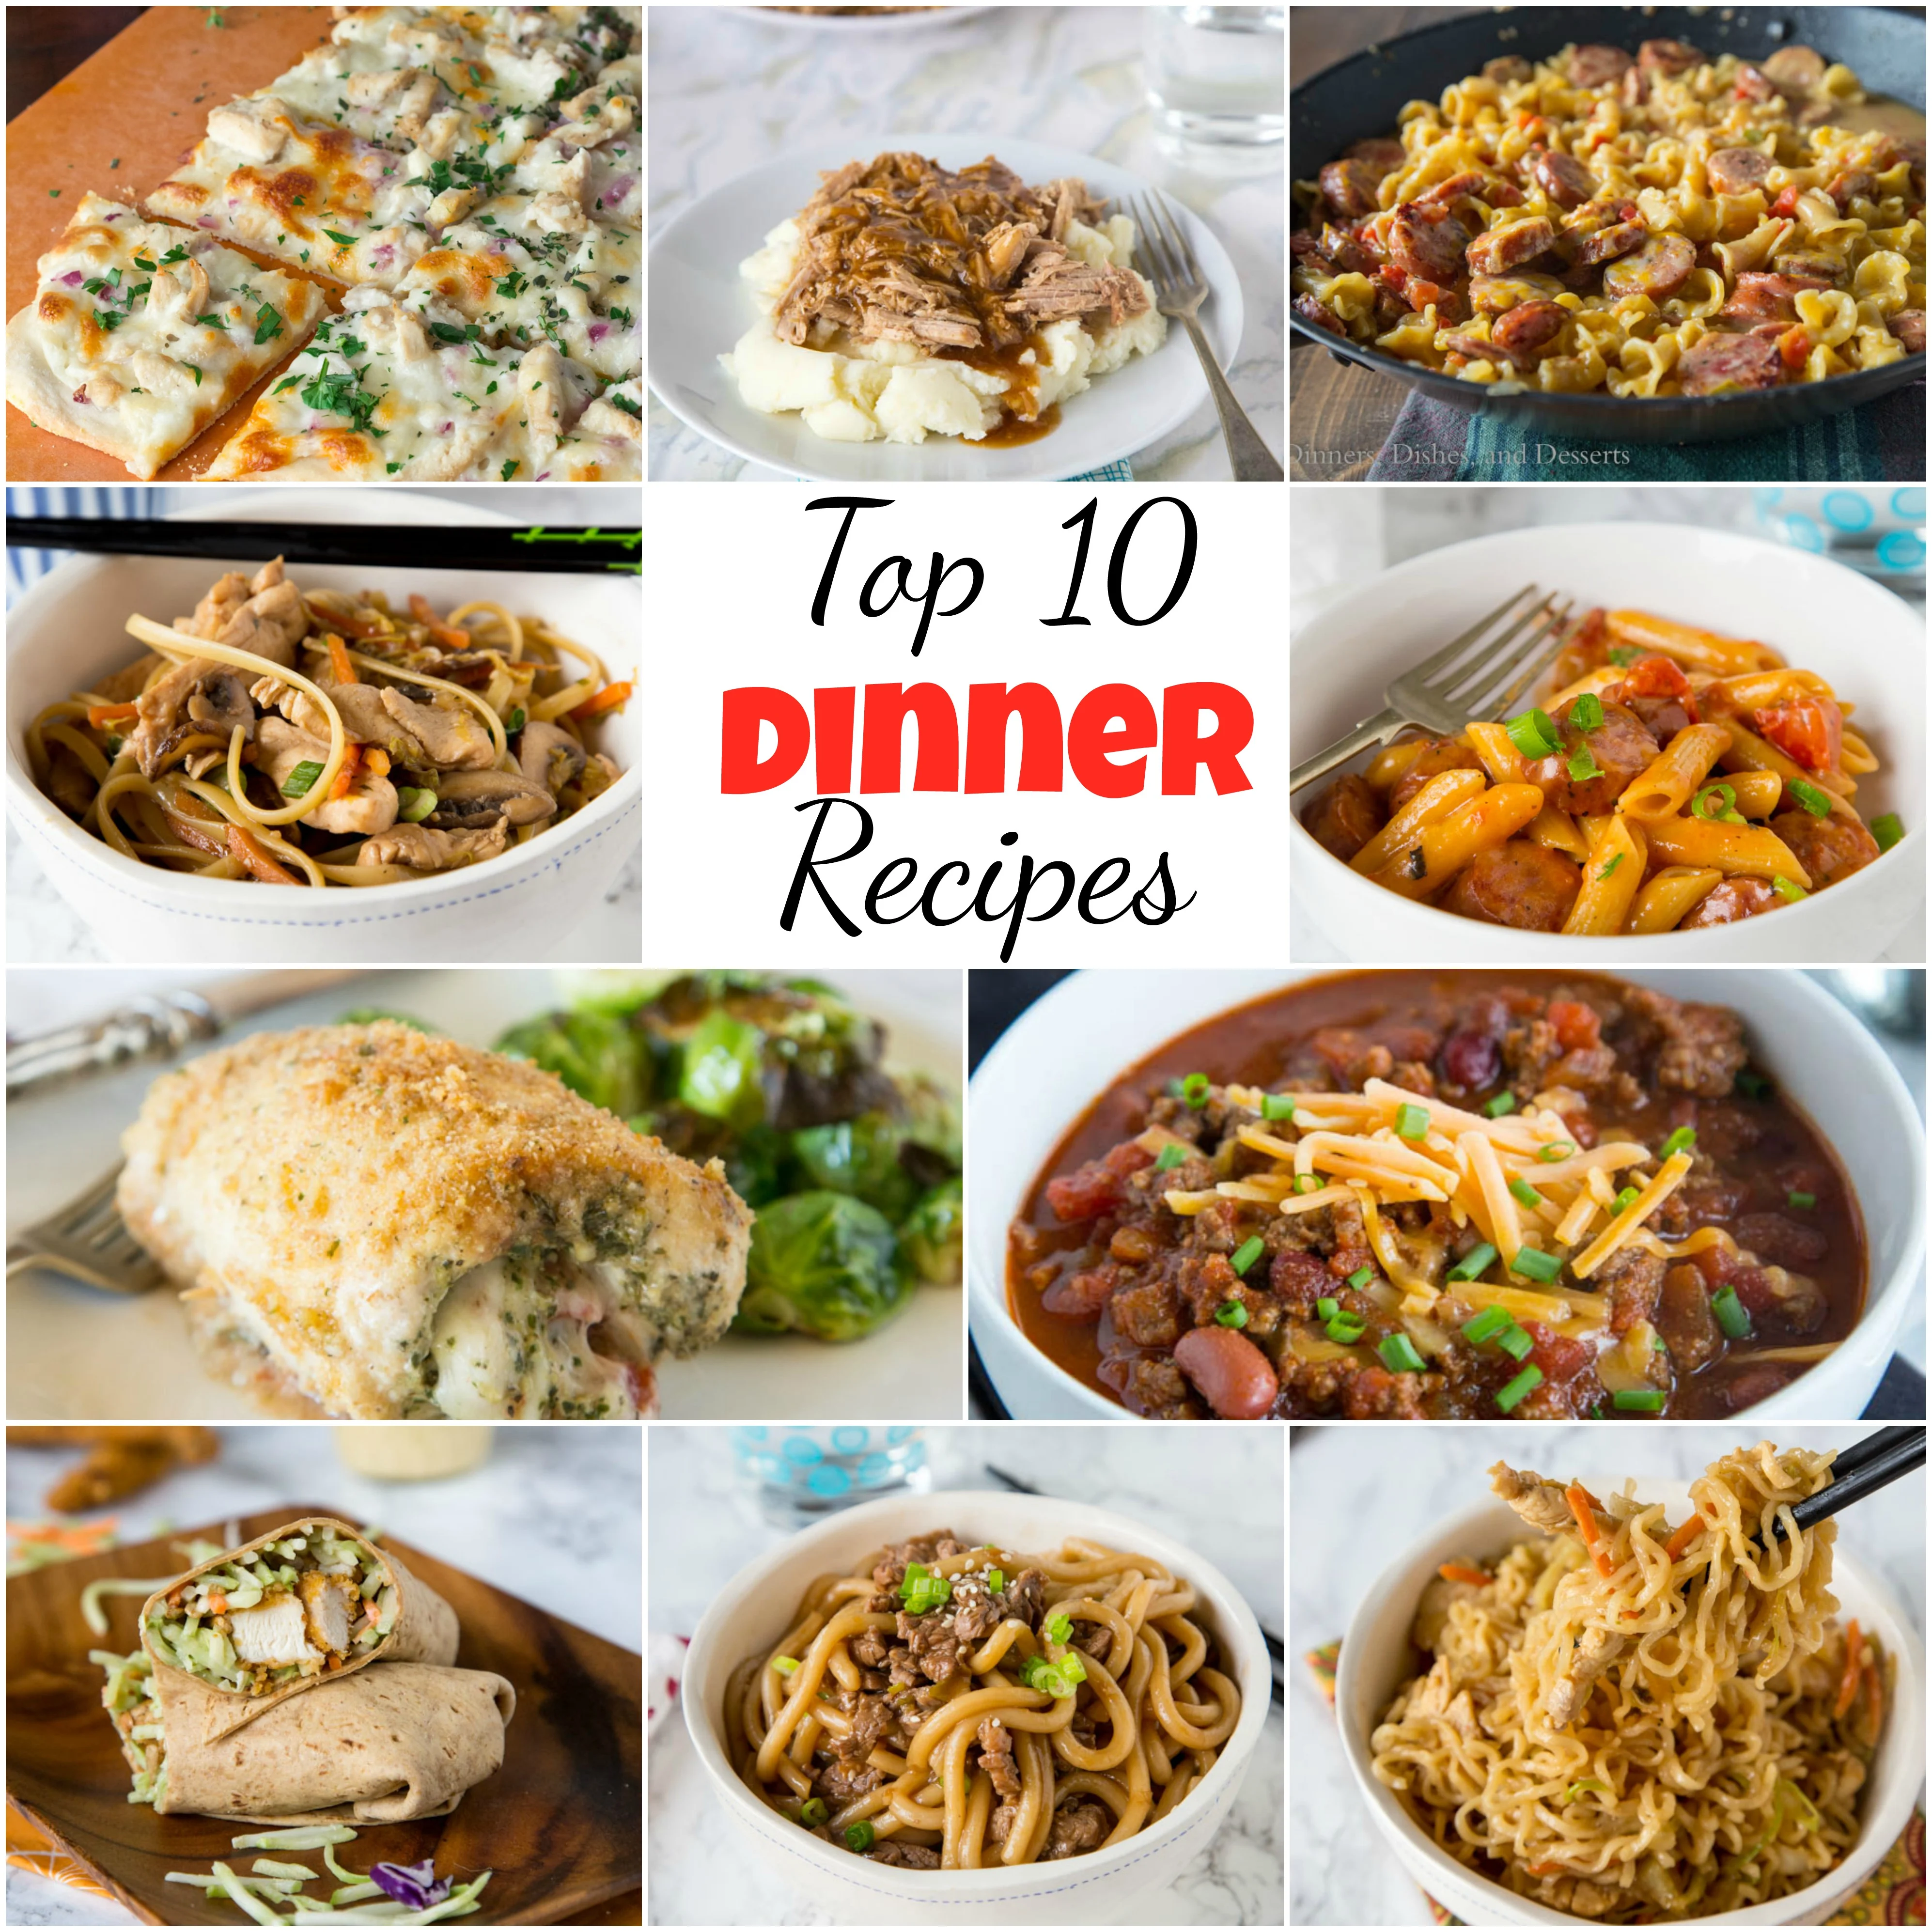 Dinner Recipes Archives - Page 20 of 36 - Dinners, Dishes, and Desserts